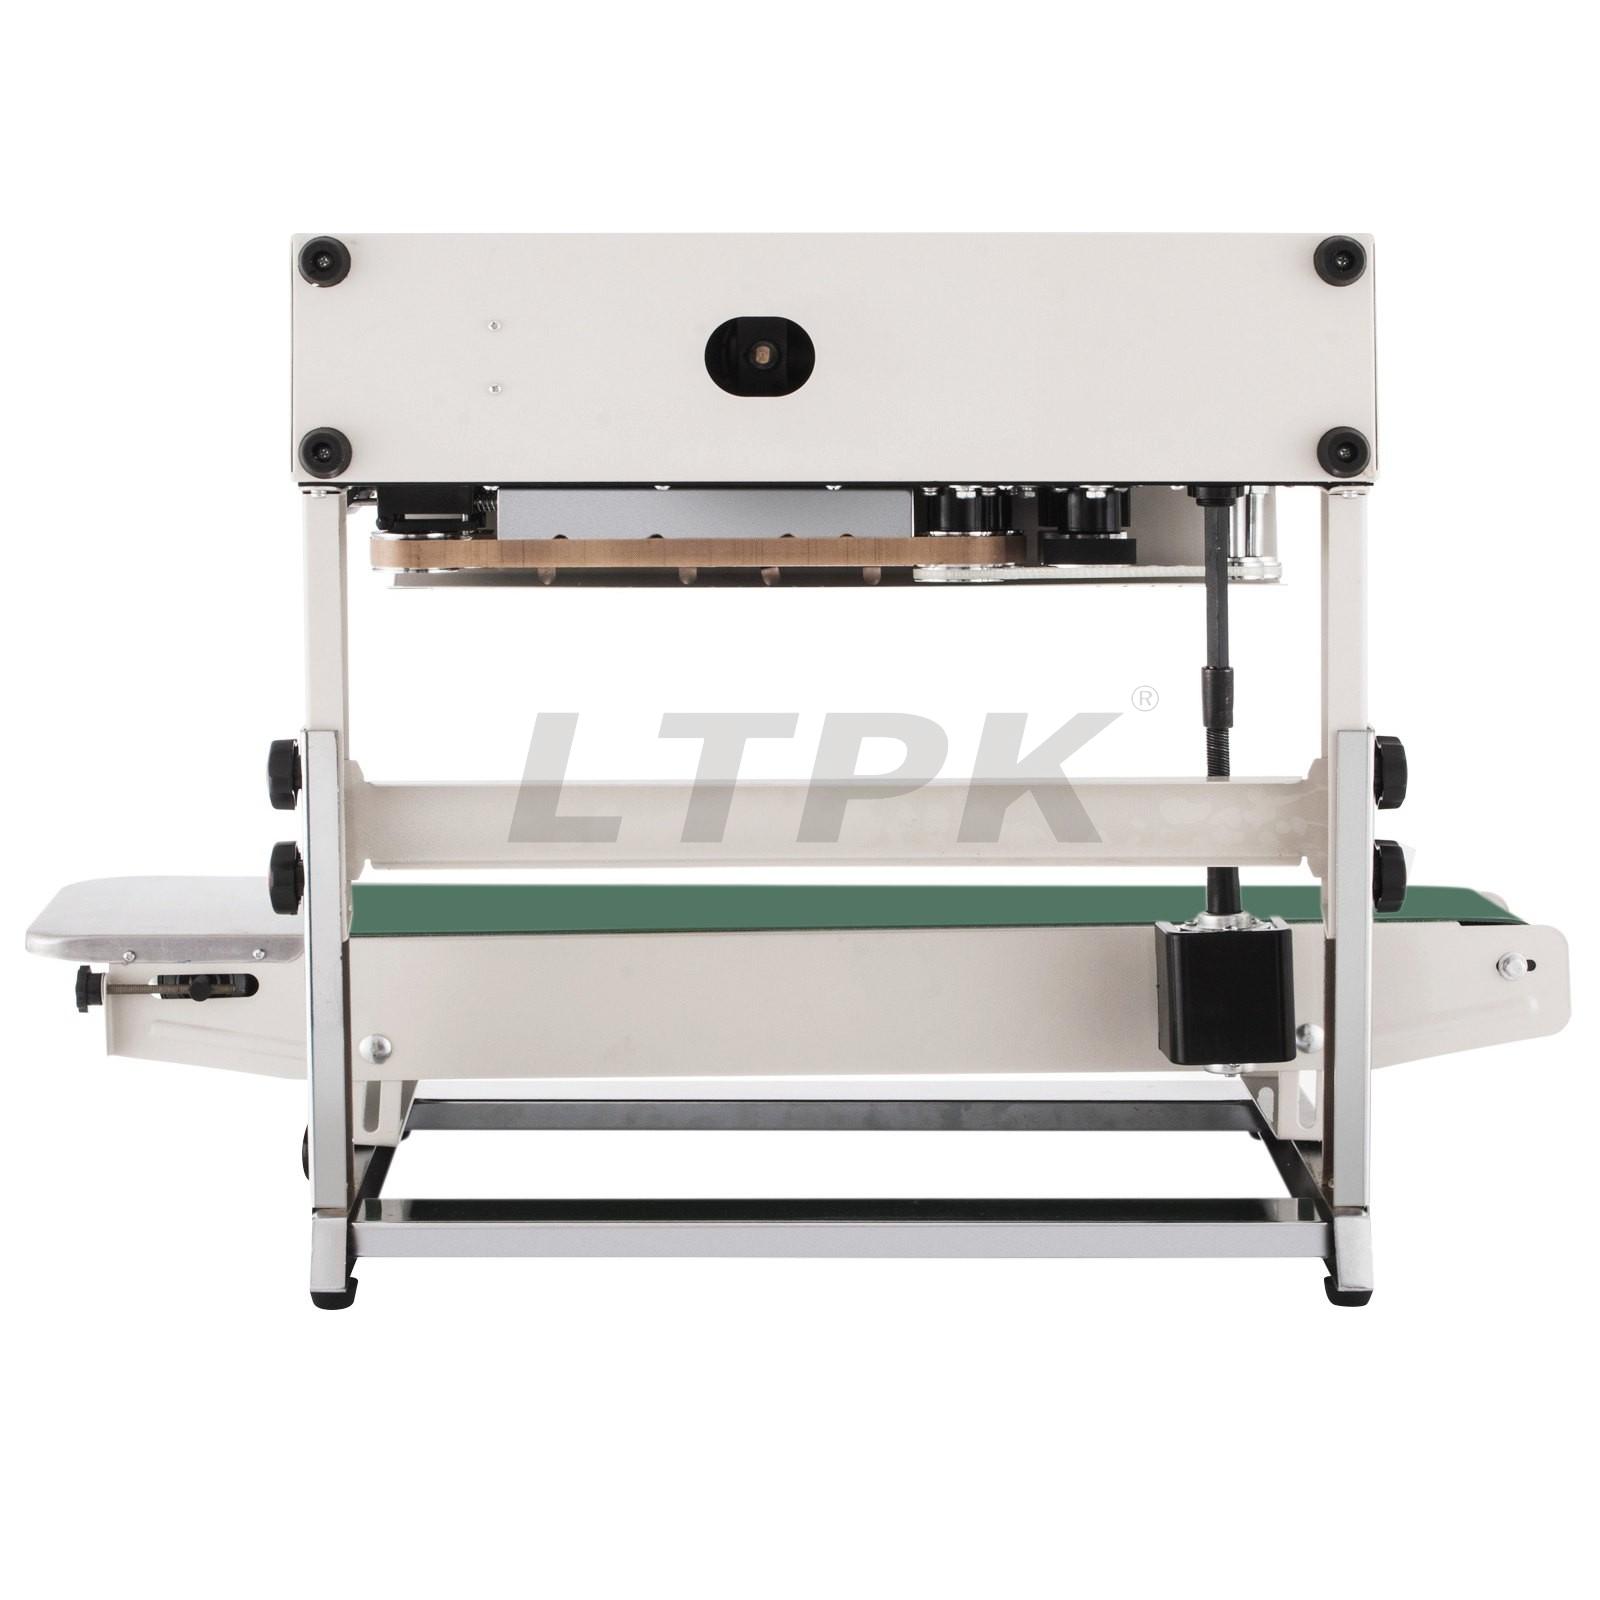 LTPK FR-900V-MS Automatic Continuous Sealing Machine with Digital Temperature Control